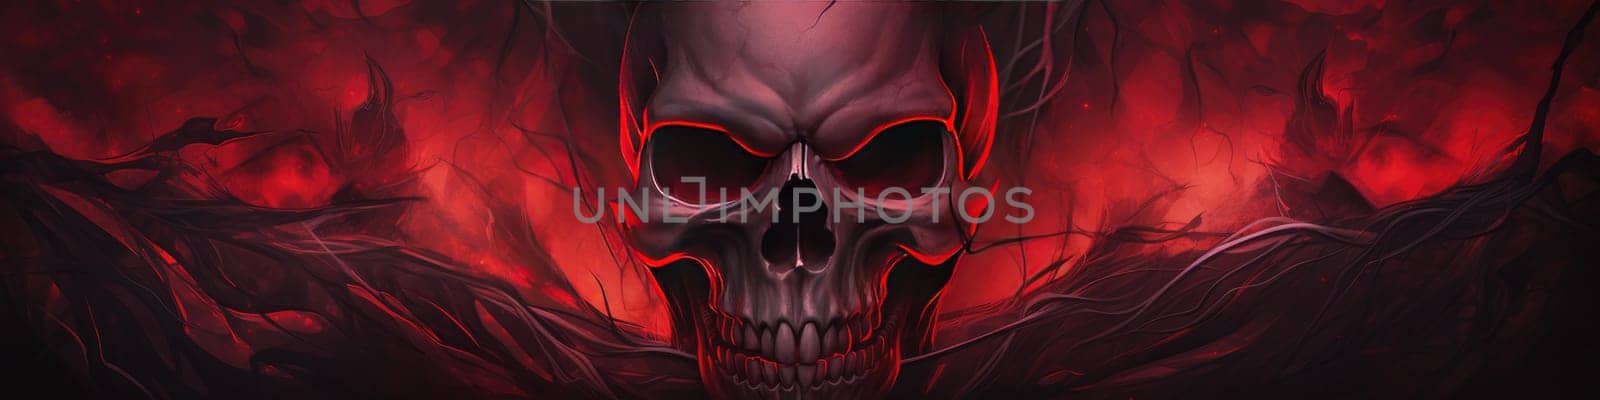 Mysterious a human skull head as banner